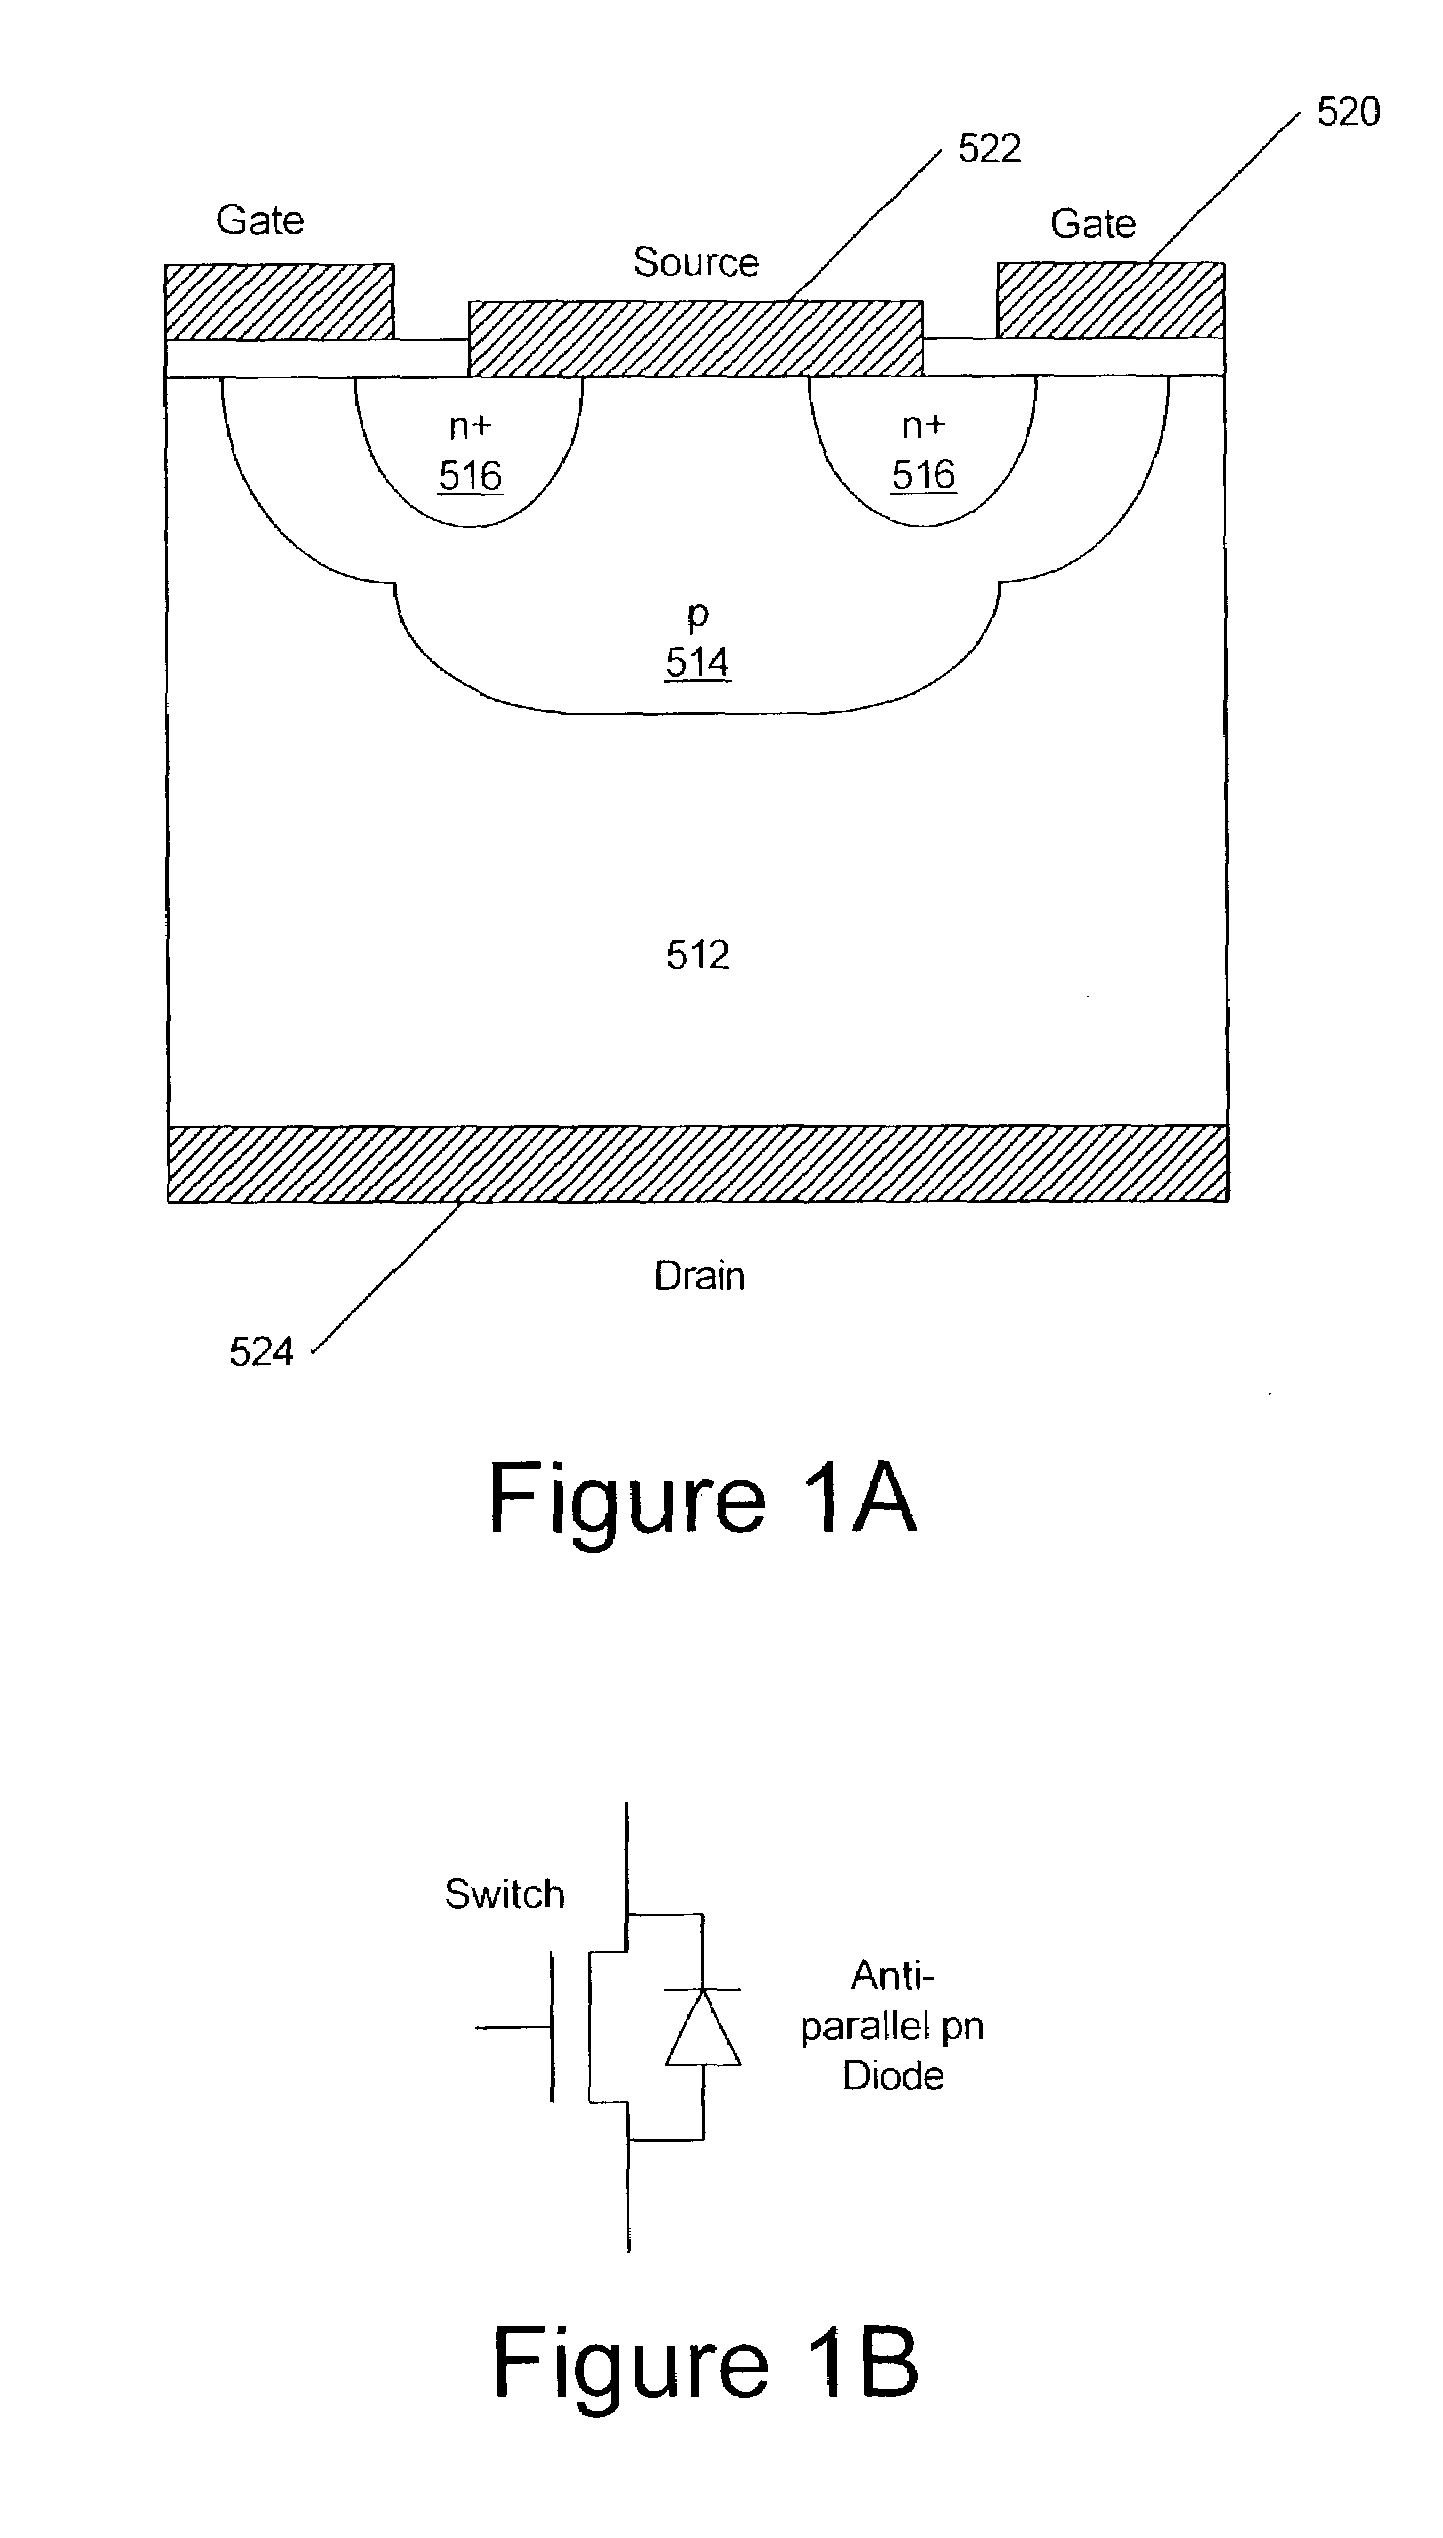 Silicon carbide MOSFETs with integrated antiparallel junction barrier Schottky free wheeling diodes and methods of fabricating the same